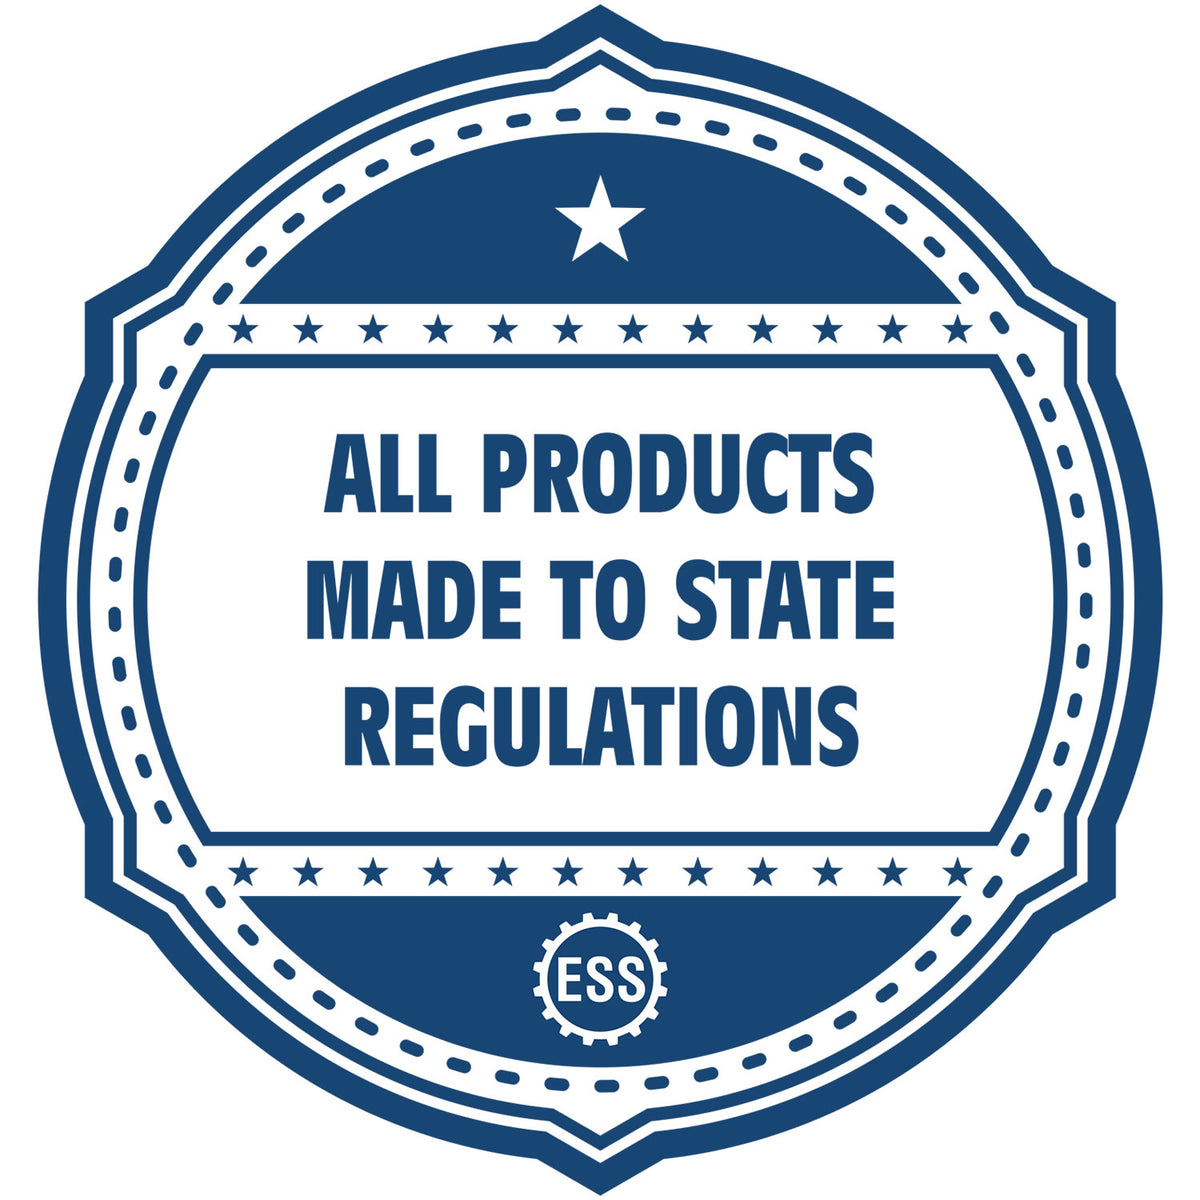 An icon or badge element for the Slim Pre-Inked Maine Landscape Architect Seal Stamp showing that this product is made in compliance with state regulations.